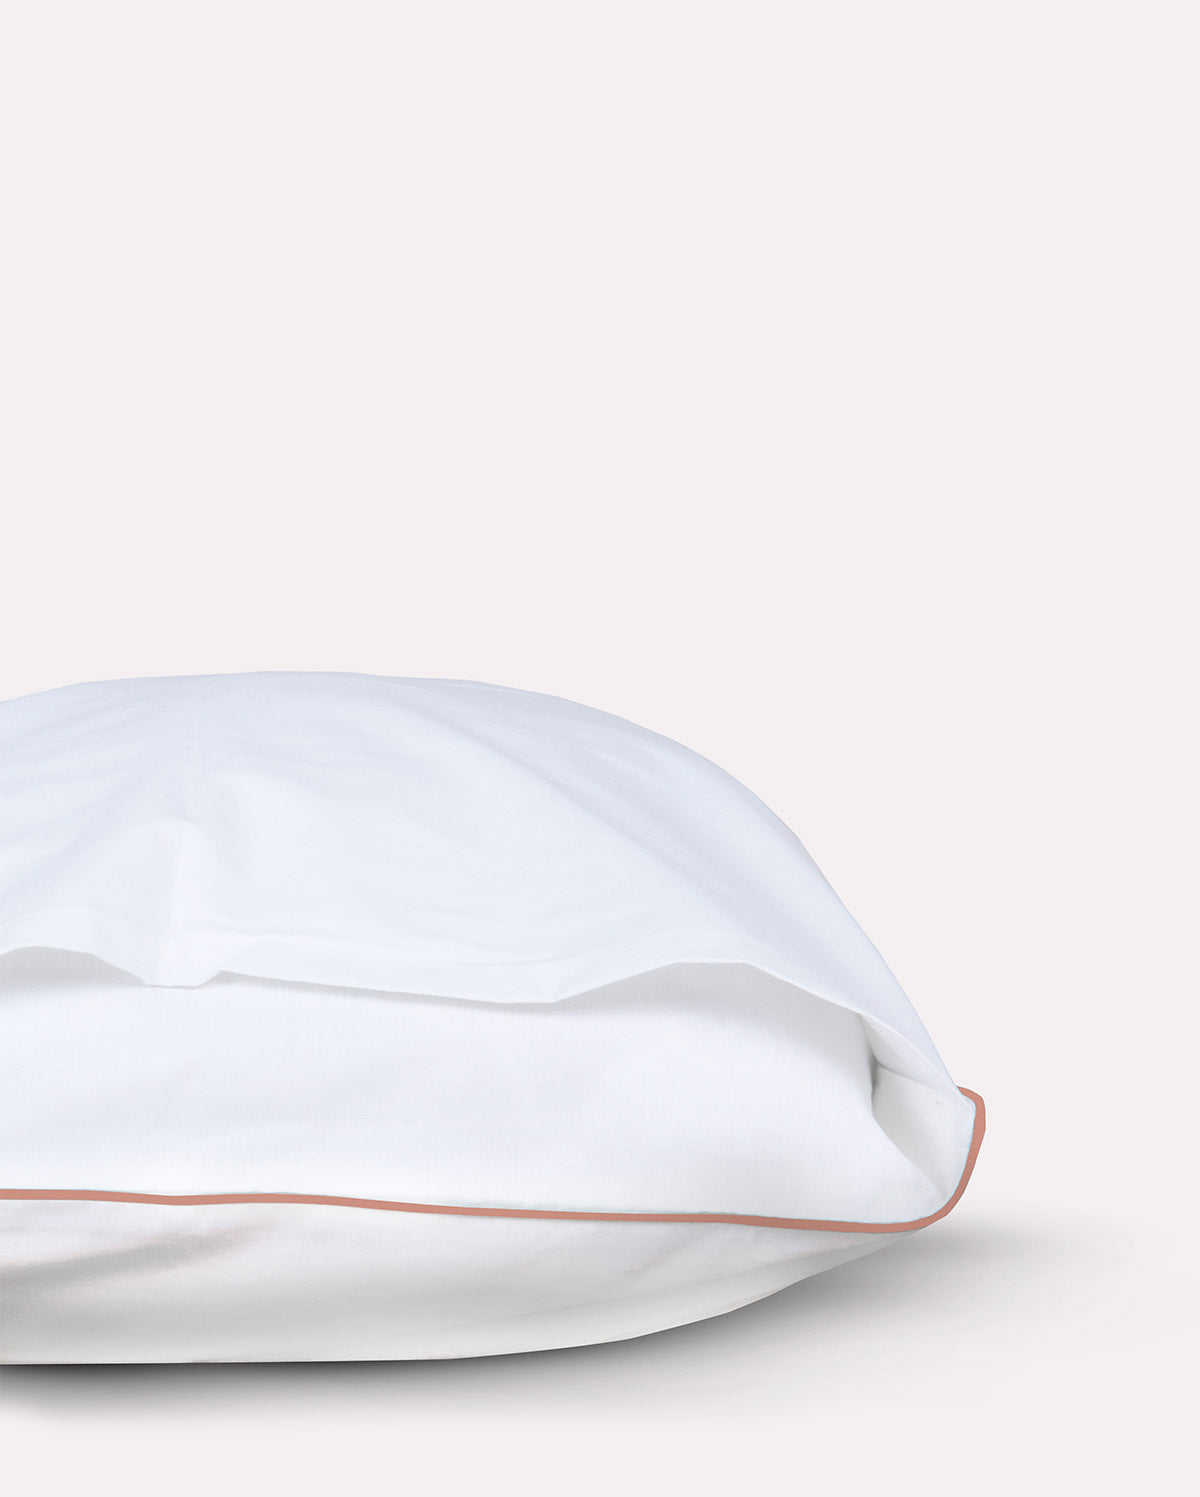 Classic Percale - Fitted Sheet Set- White with Peach Piped Edge